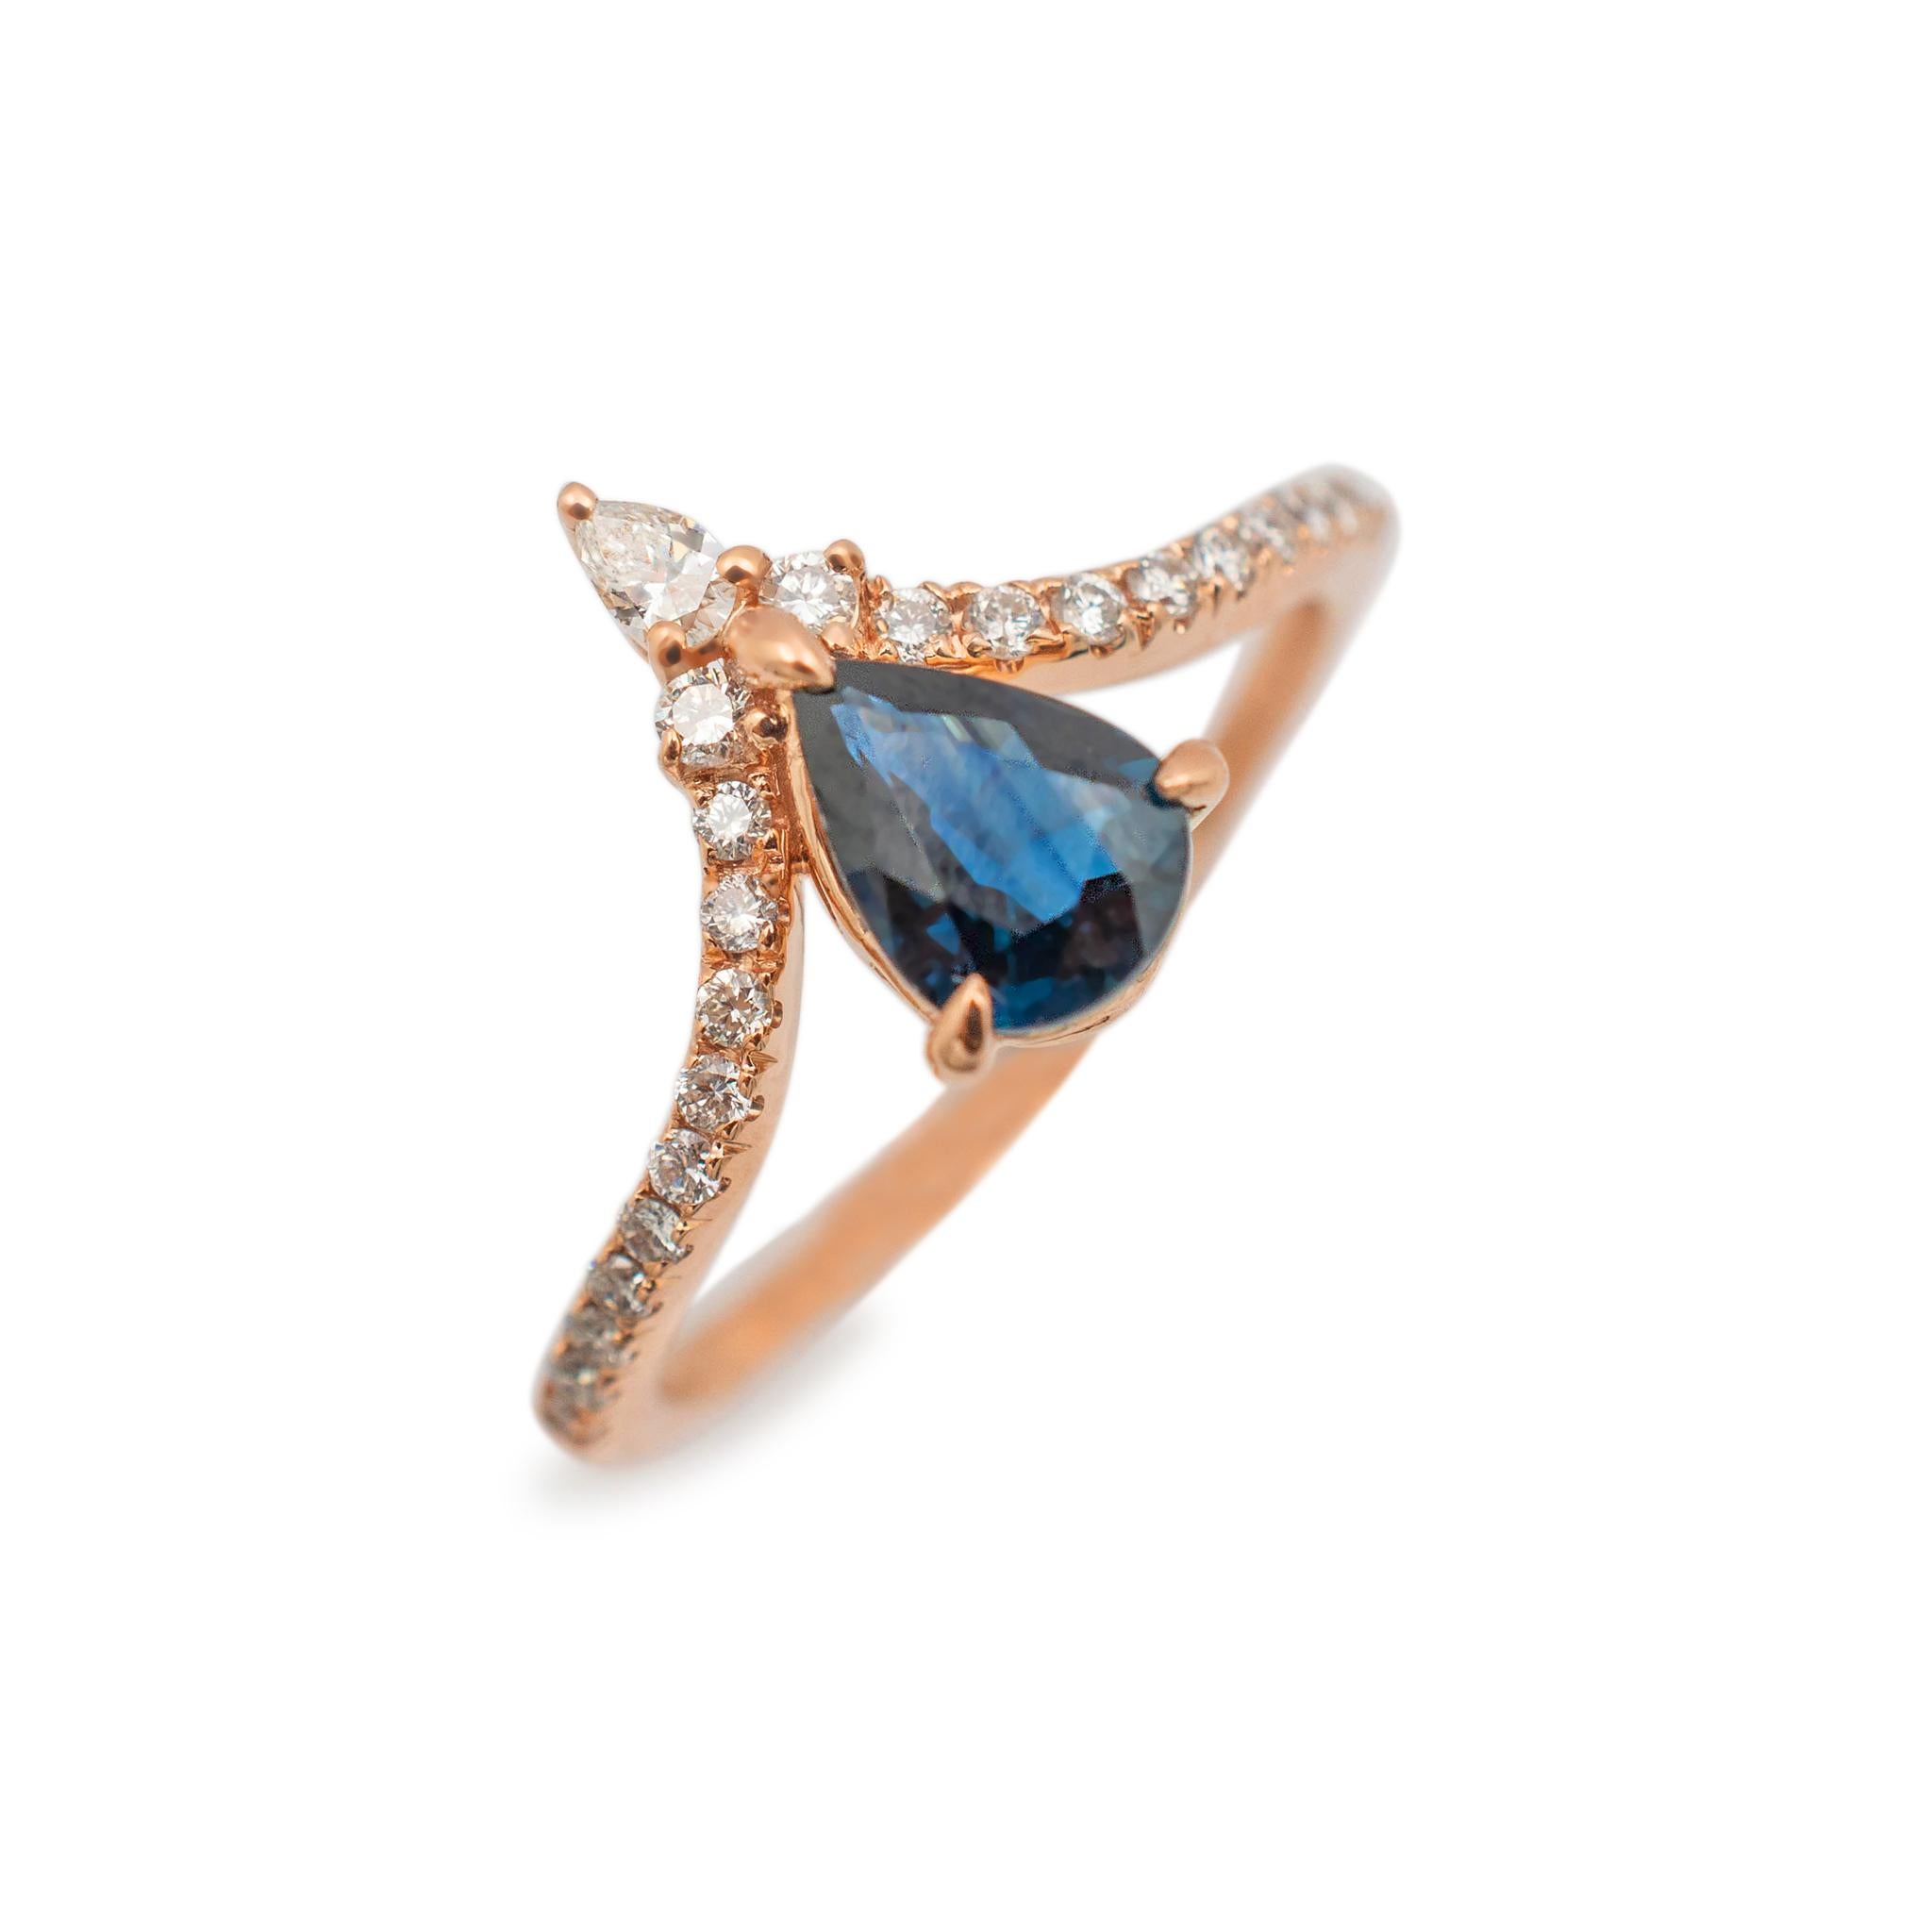 Gender: Ladies

Metal Type: 14K Rose Gold

Size: 6.75

Shank Width: 1.45mm

Head measurements: 11.95mm in length by 6.65mm in width

Weight: 2.40 grams

Lady's custom made polished 14K rose gold, diamond and sapphire cocktail ring with a half round